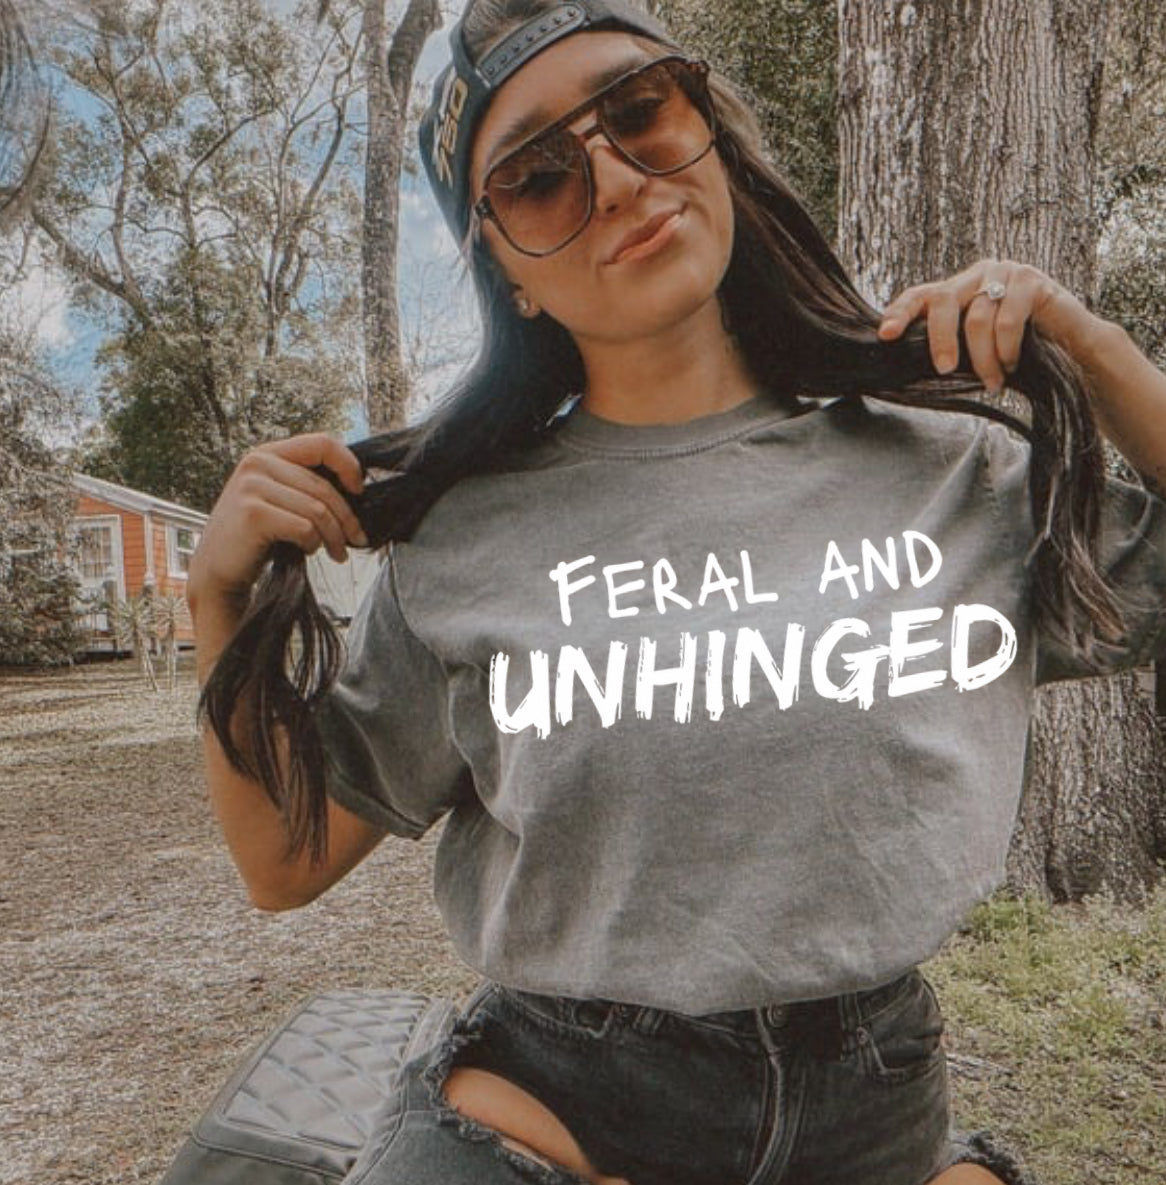 Feral and Unhinged Tee